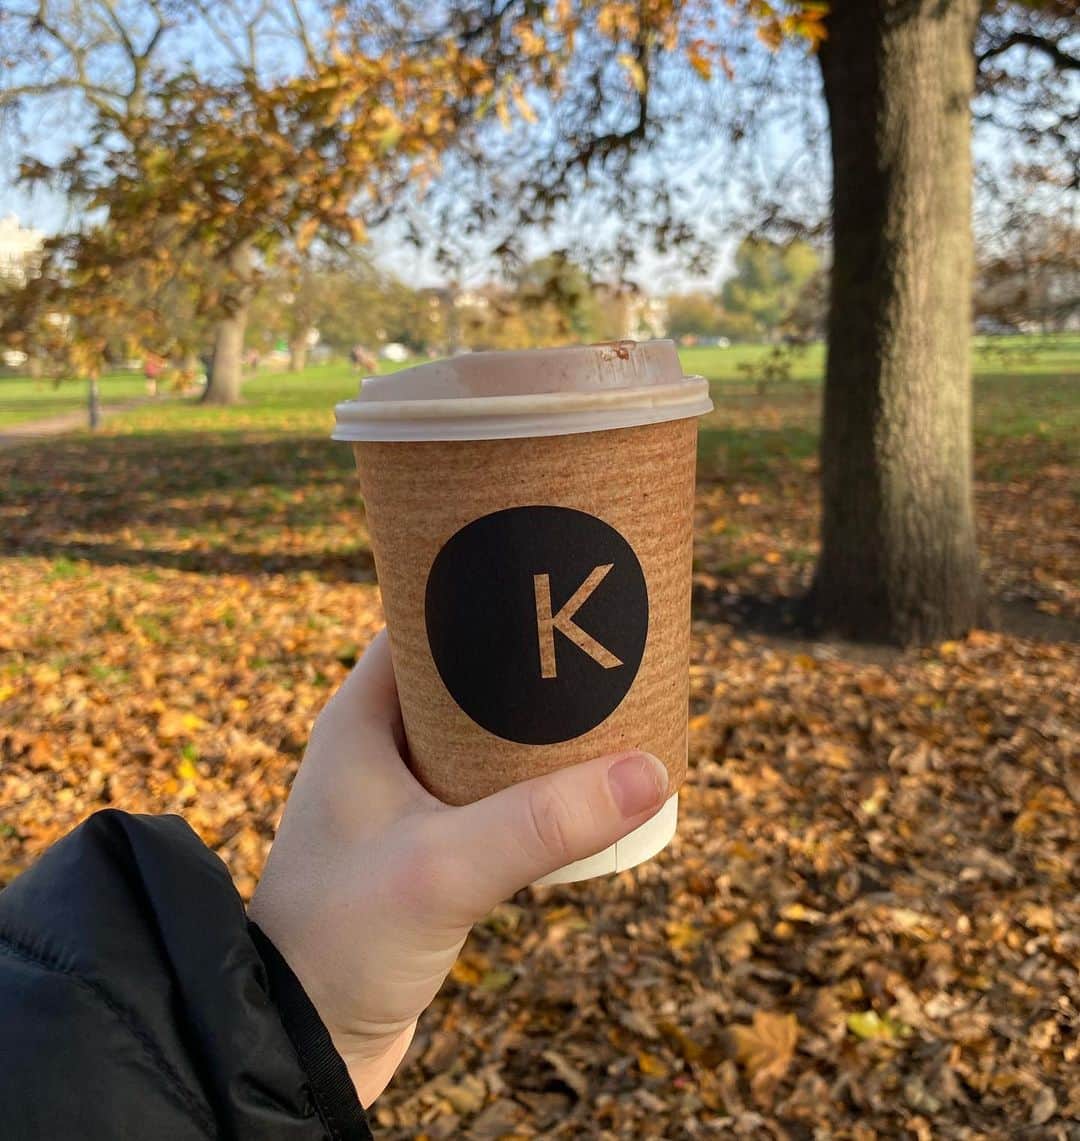 Eat With Steph & Coのインスタグラム：「Best hot chocolate in south London? Discuss....  Finally tried @knoopschocolate last weekend and wow was it worth the walk and Boris bike (because #lockdown and avoiding transport!)   I went for a 54% with nutmeg and... 👌🏻👌🏻👌🏻 not normally a dark choc tan but the tasting notes sounded good so I went for it and yup it’s great. Intense chocolate with a perfect hint of bitterness and not too sweet 🤤 need more weekends to try a white, a milk and the ruby. (And the giant marshmallow 😏)   They are open for takeaway during lockdown so grab one and take a walk round the common 🍂  #knoops #knoopschocolate #knoopsclaphamjunction #hotchocolate」